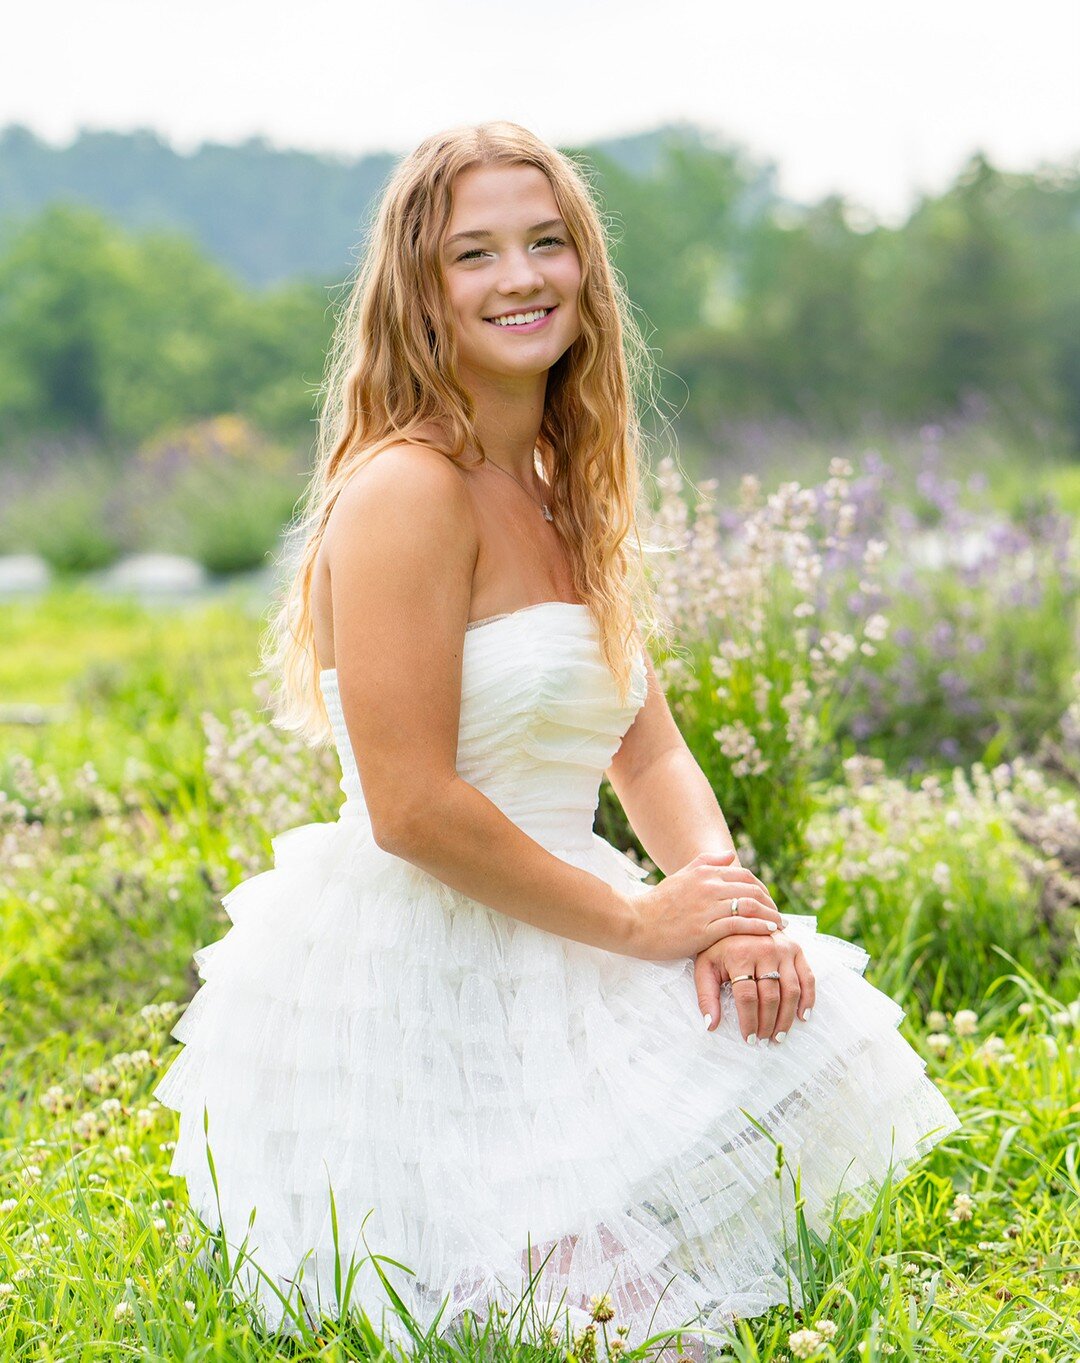 My Class of 2024 friends, behold the lavender fields at @warwickfurnacefarm and this stunning beauty, Emily!! What a perfect combo!! I have had many highlights throughout my portrait photography career, and this one was right up at the tippy top! I'v